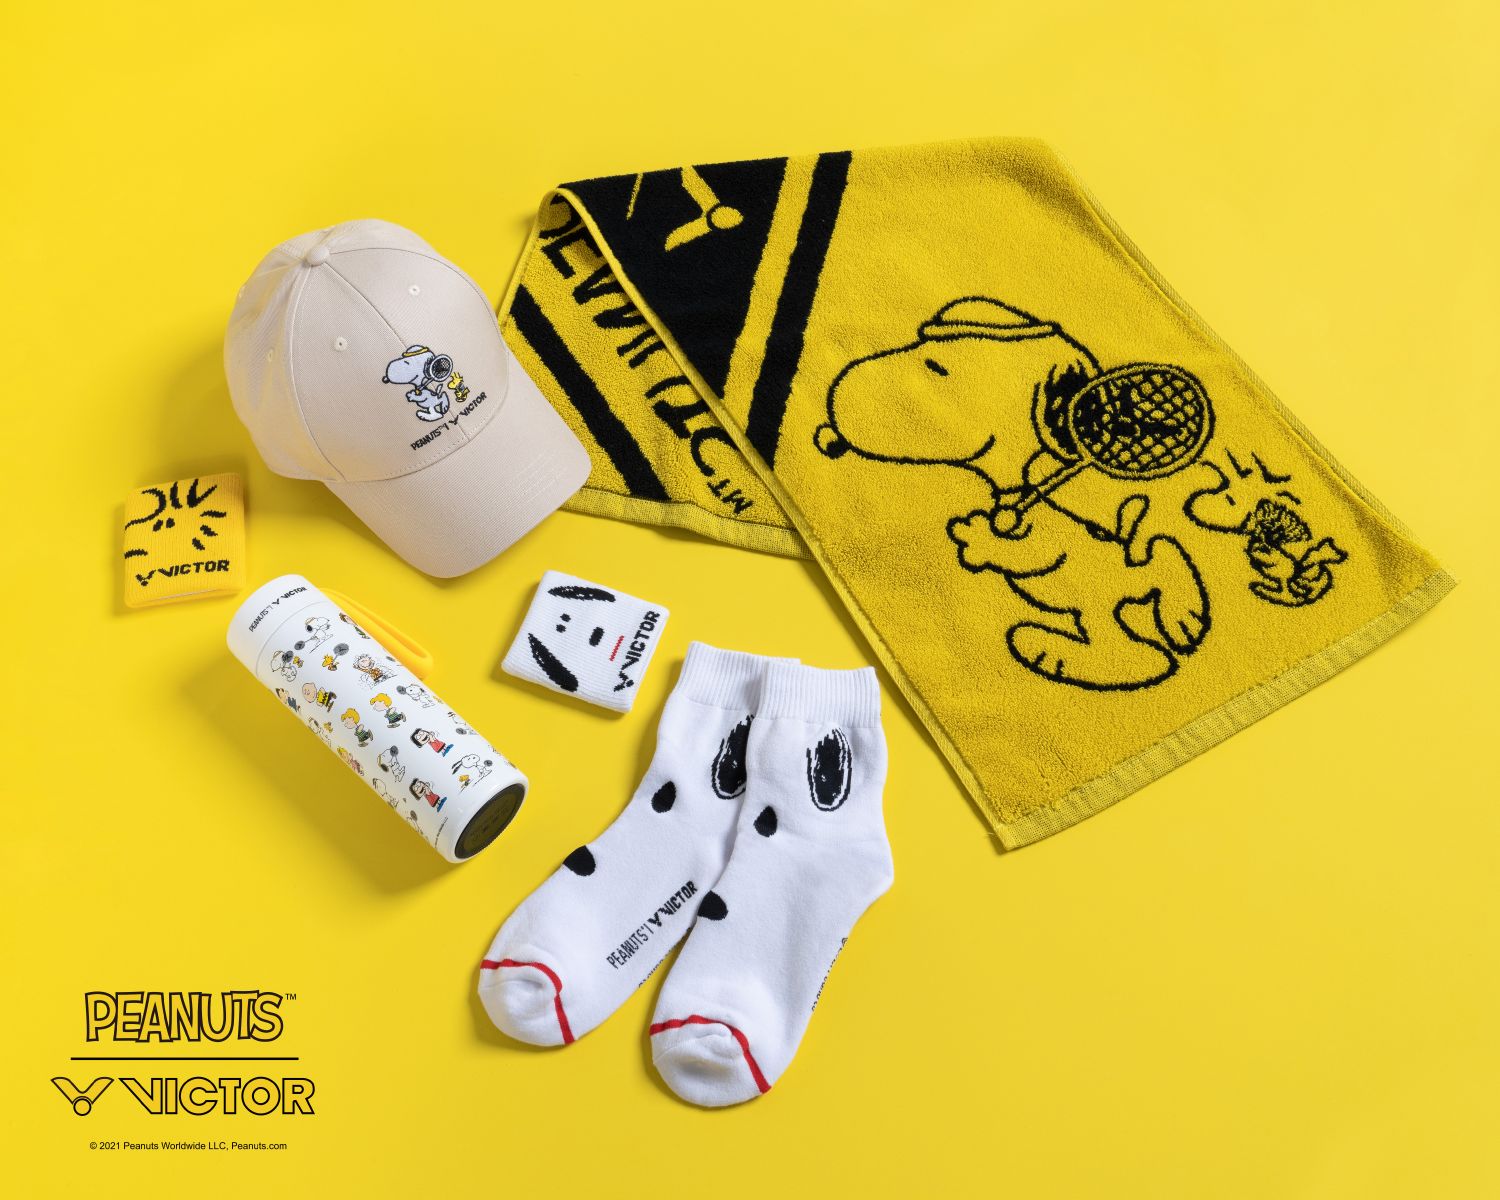 Introducing the Exclusive Limited Edition Snoopy Badminton Set: Victor x Peanuts